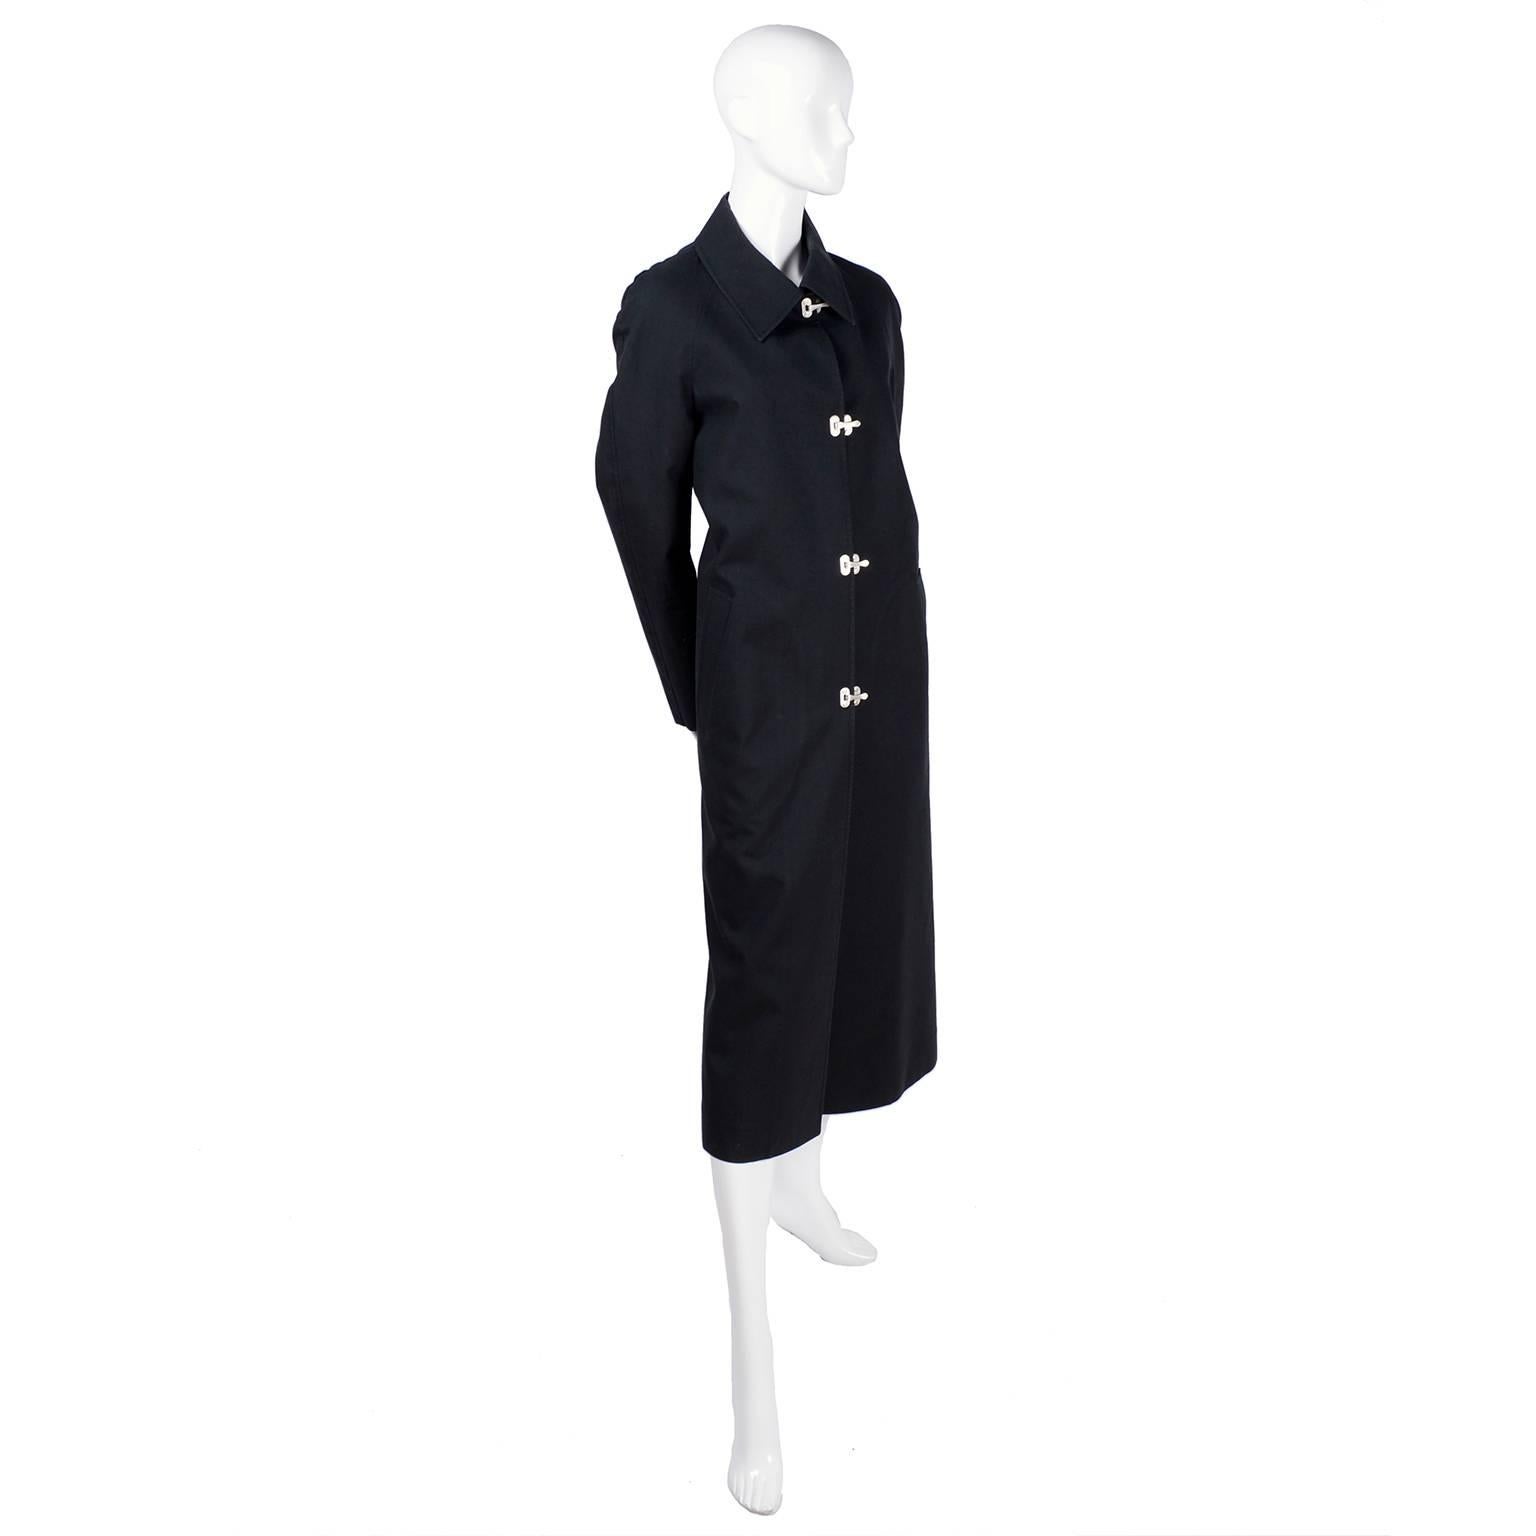 Celine Black Raincoat With Metal Toggle Buckles and Pockets Size 